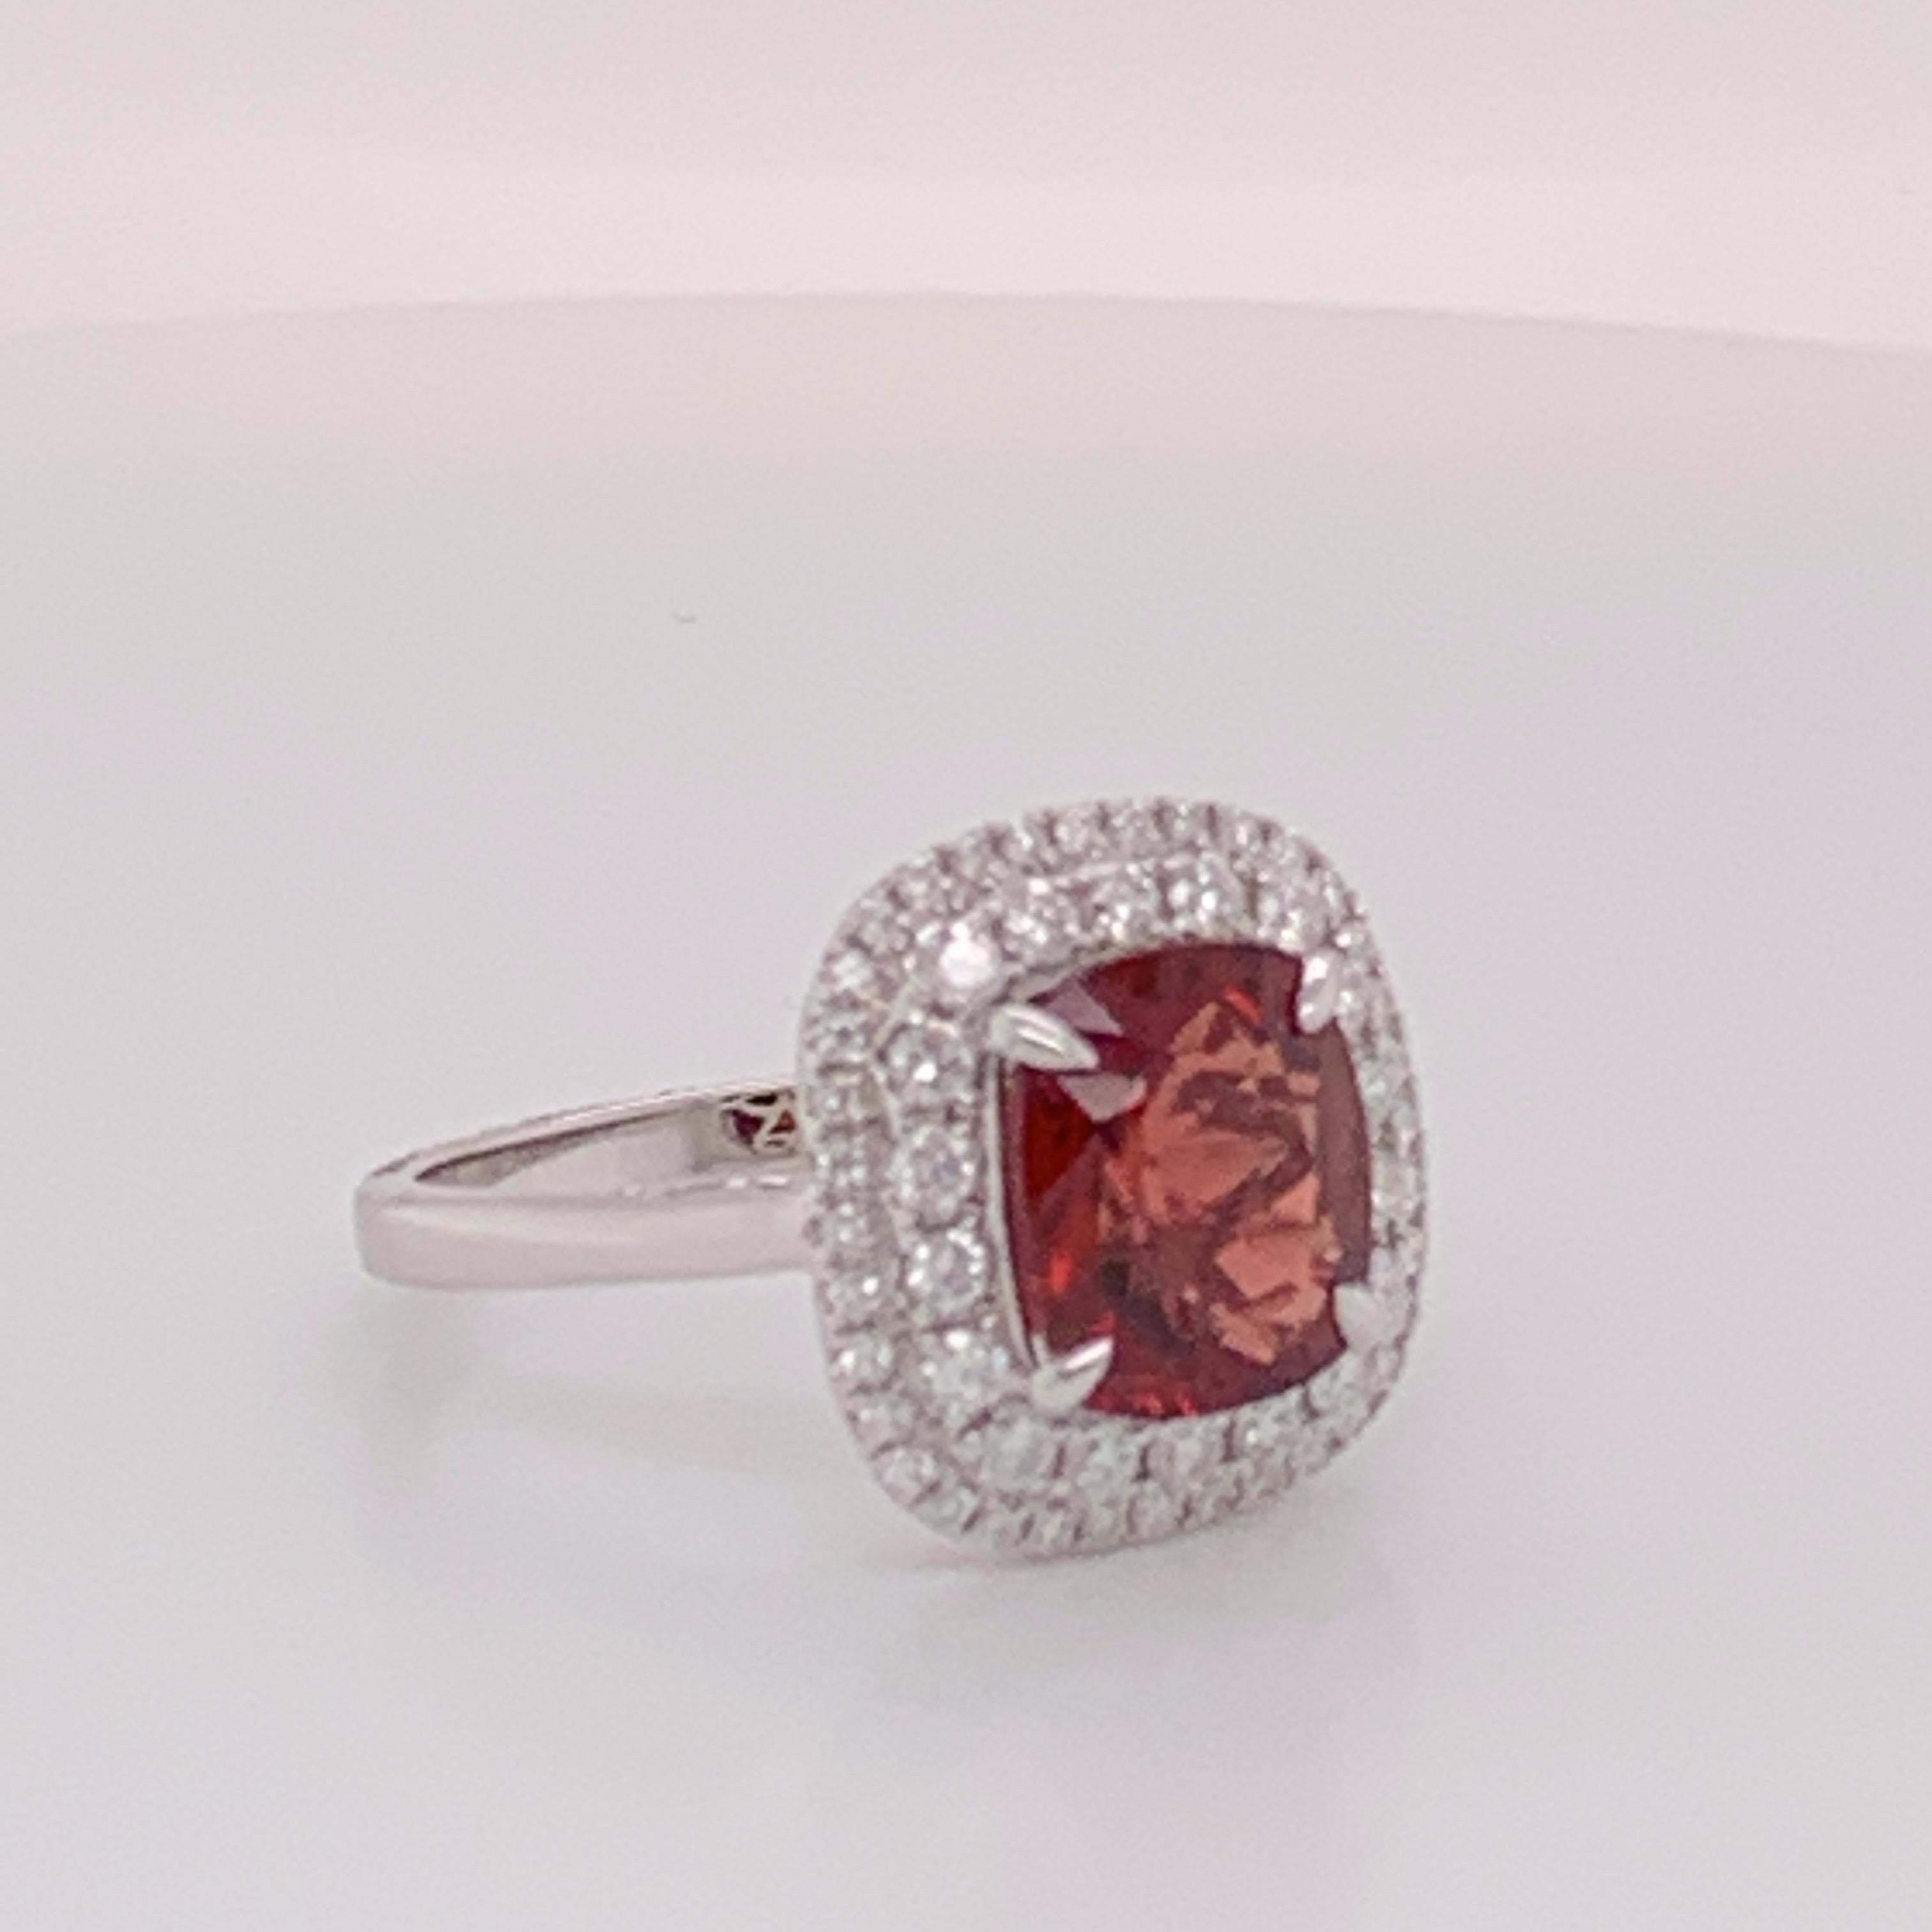 Cushion Cut Red Spinal and White Diamond Ring